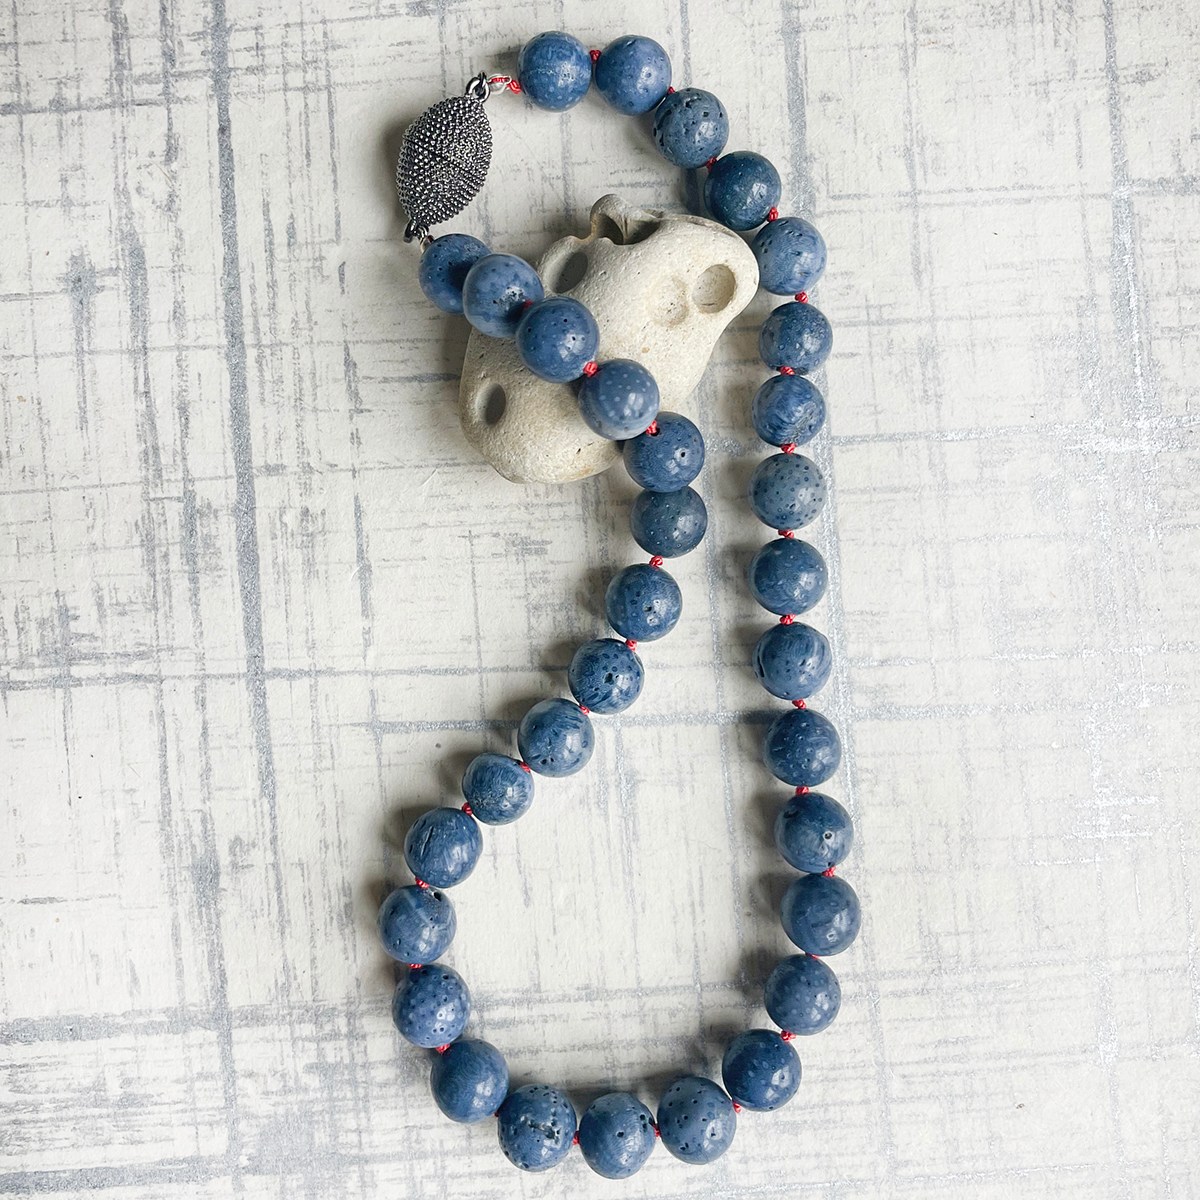 natural blue coral necklace from the collection of Arts & Health